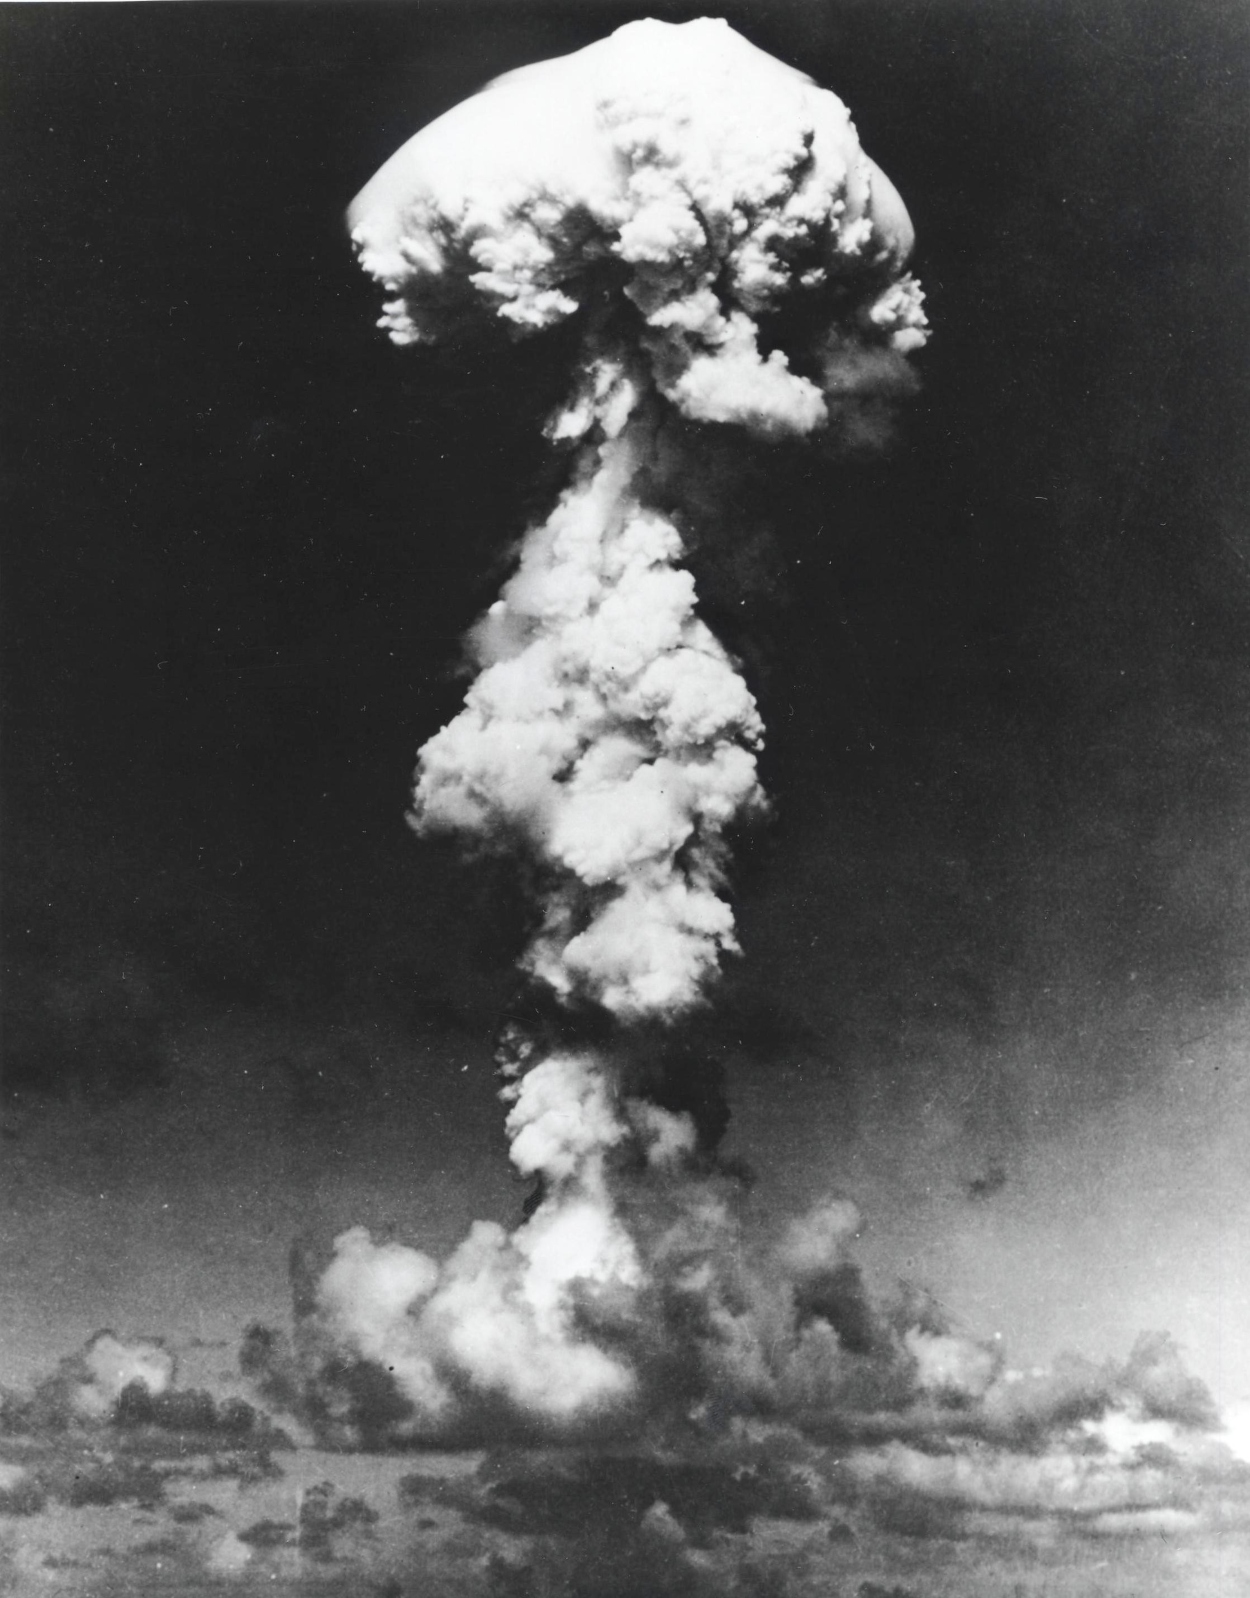 Nuclear bombs are the most destructive and deadly weapons ever created.  Photo: Los Alamos National Laboratory